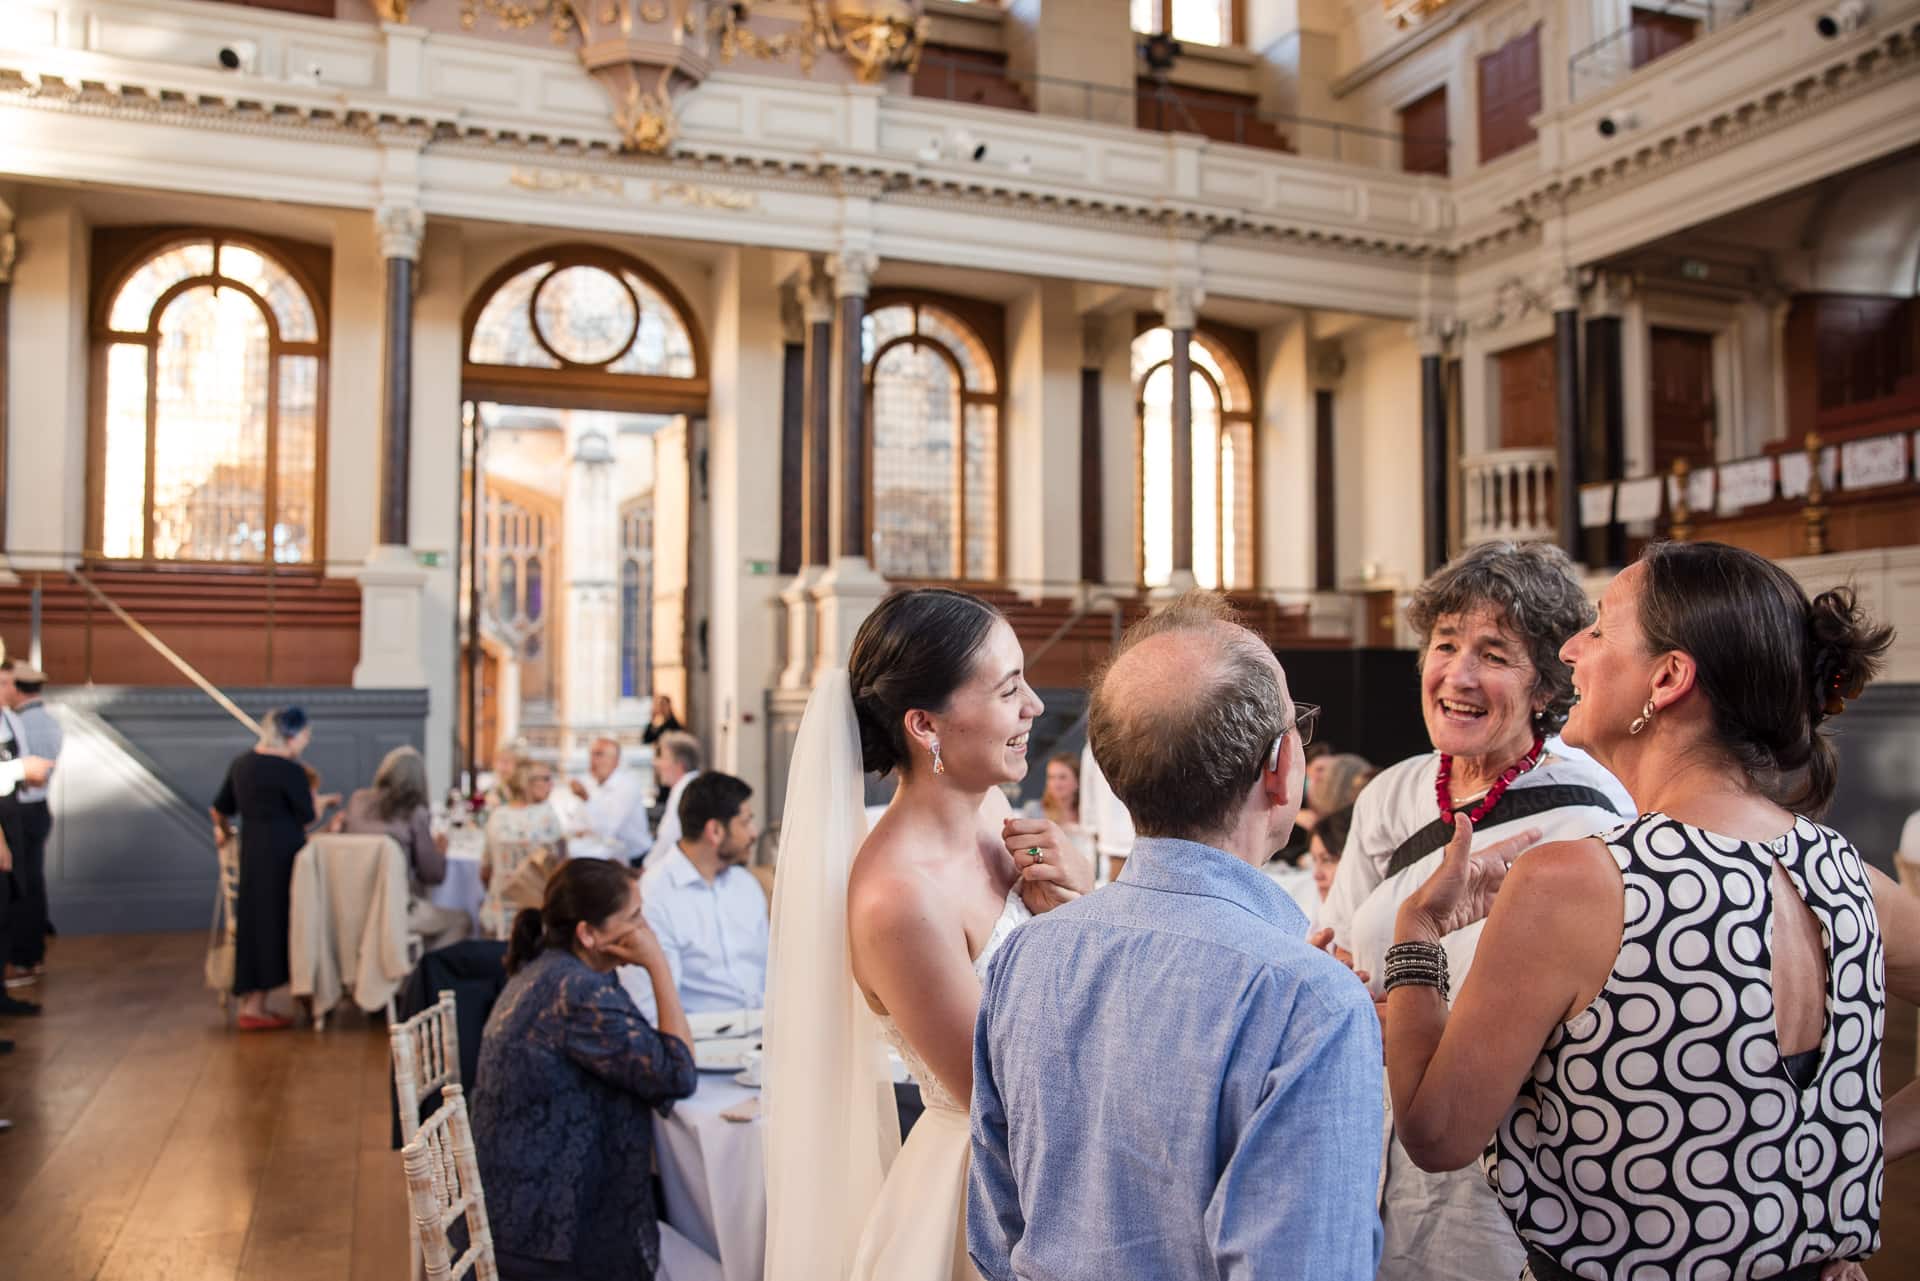 The bride talking with guests inside the Sheldonian Theatre Oxford